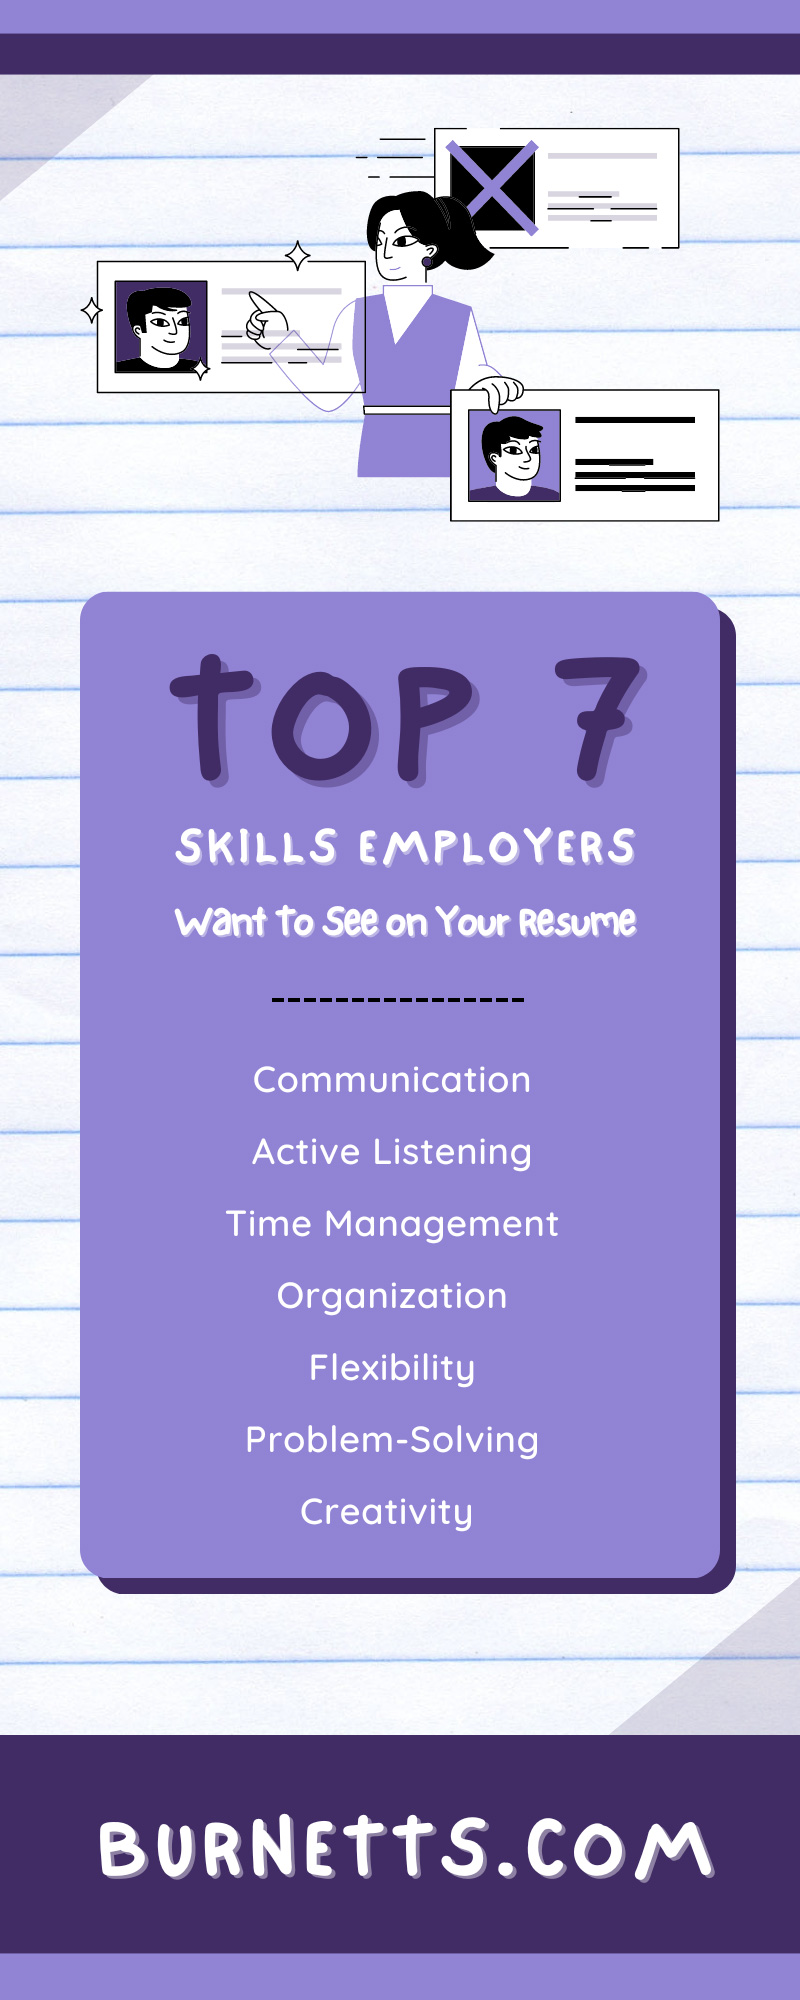 Top 7 Skills Employers Want To See on Your Resume